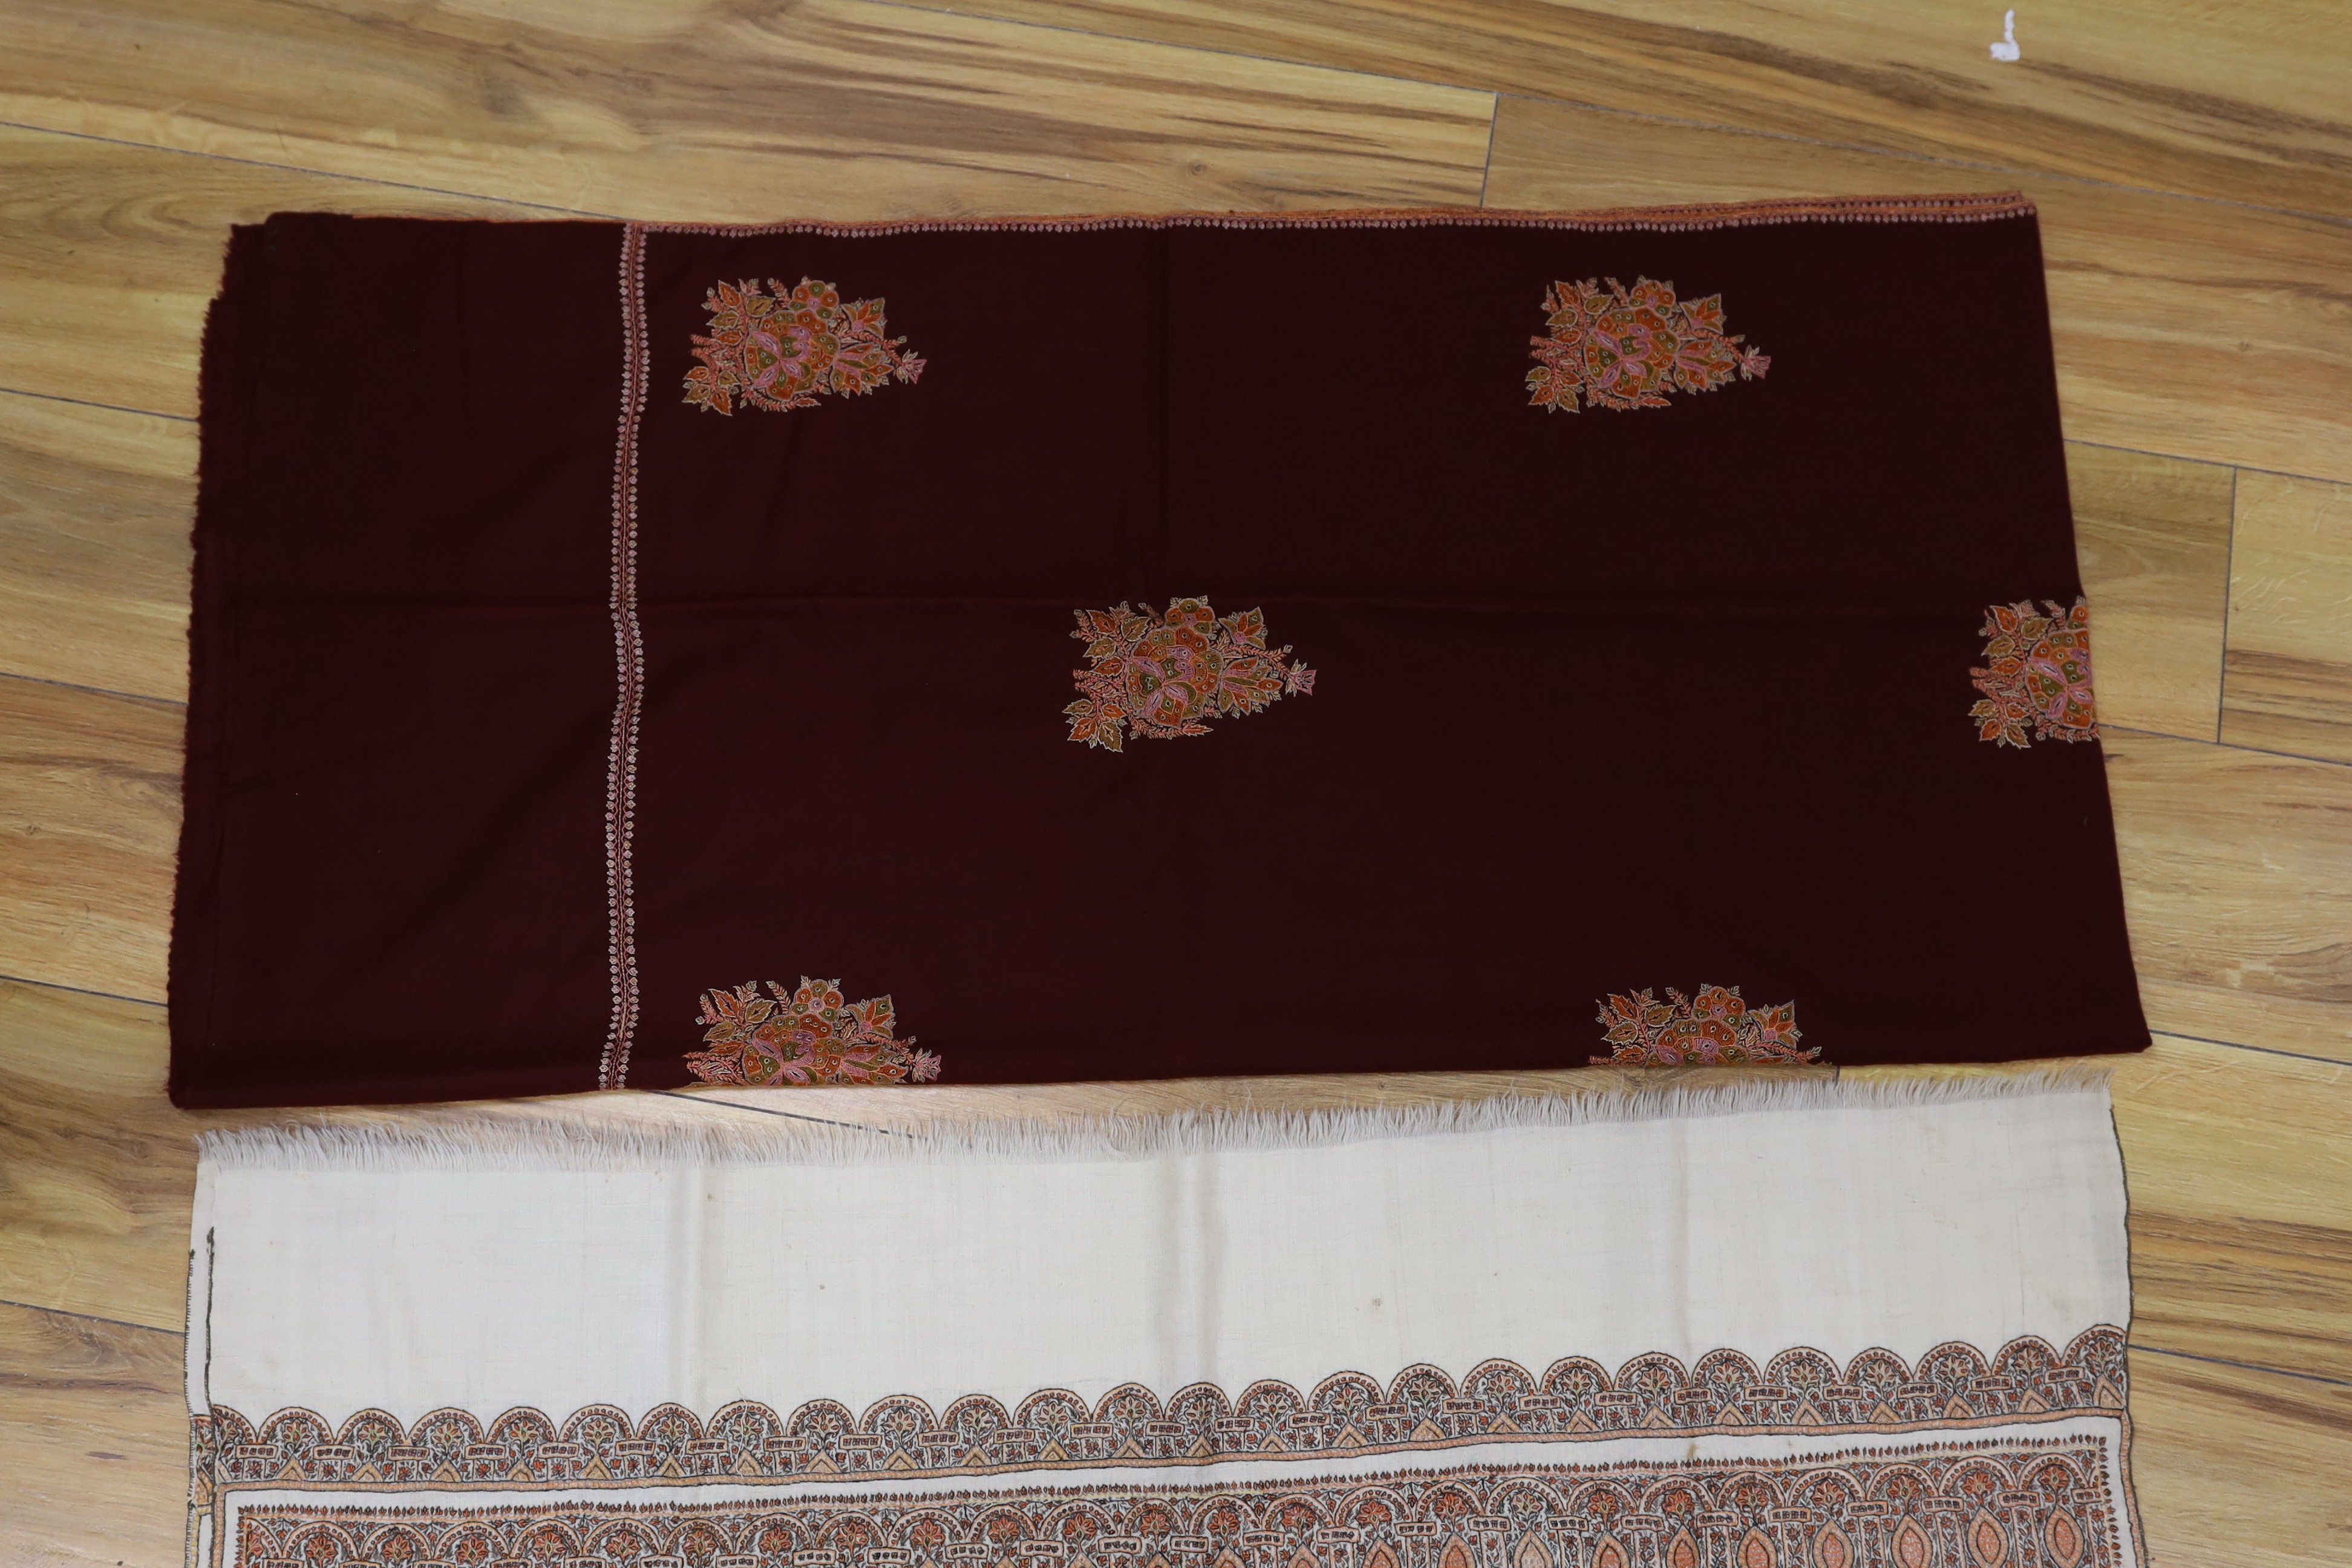 An Indian 20th century pashmina silk embroidered shawl and a cashmere wool shawl with spot motif embroidery